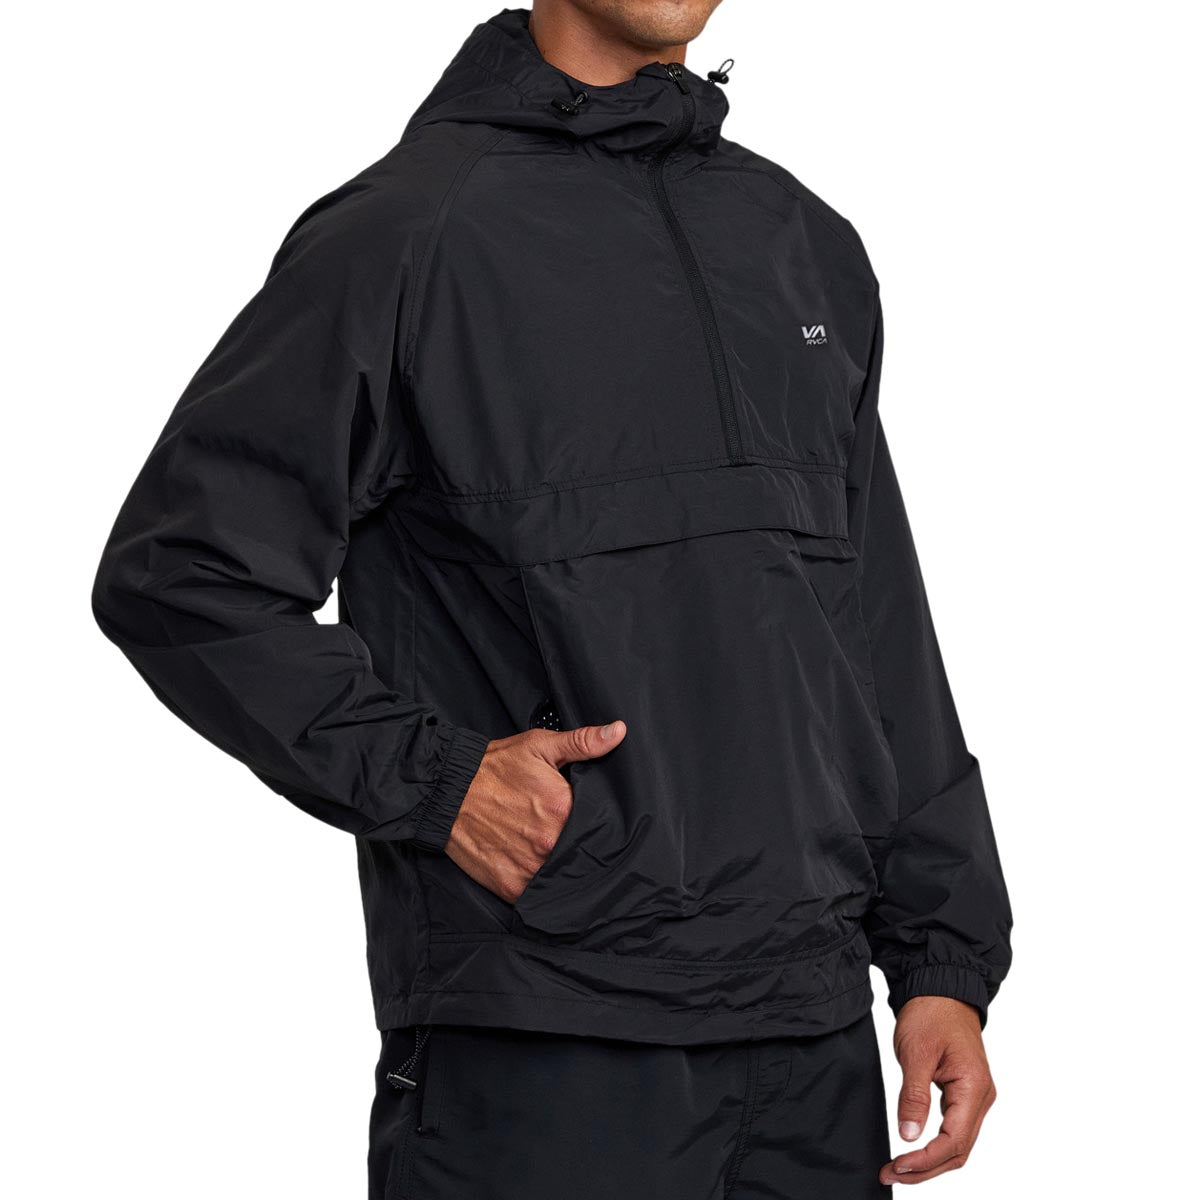 RVCA Outsider Packable Anorack Jacket - Black image 4